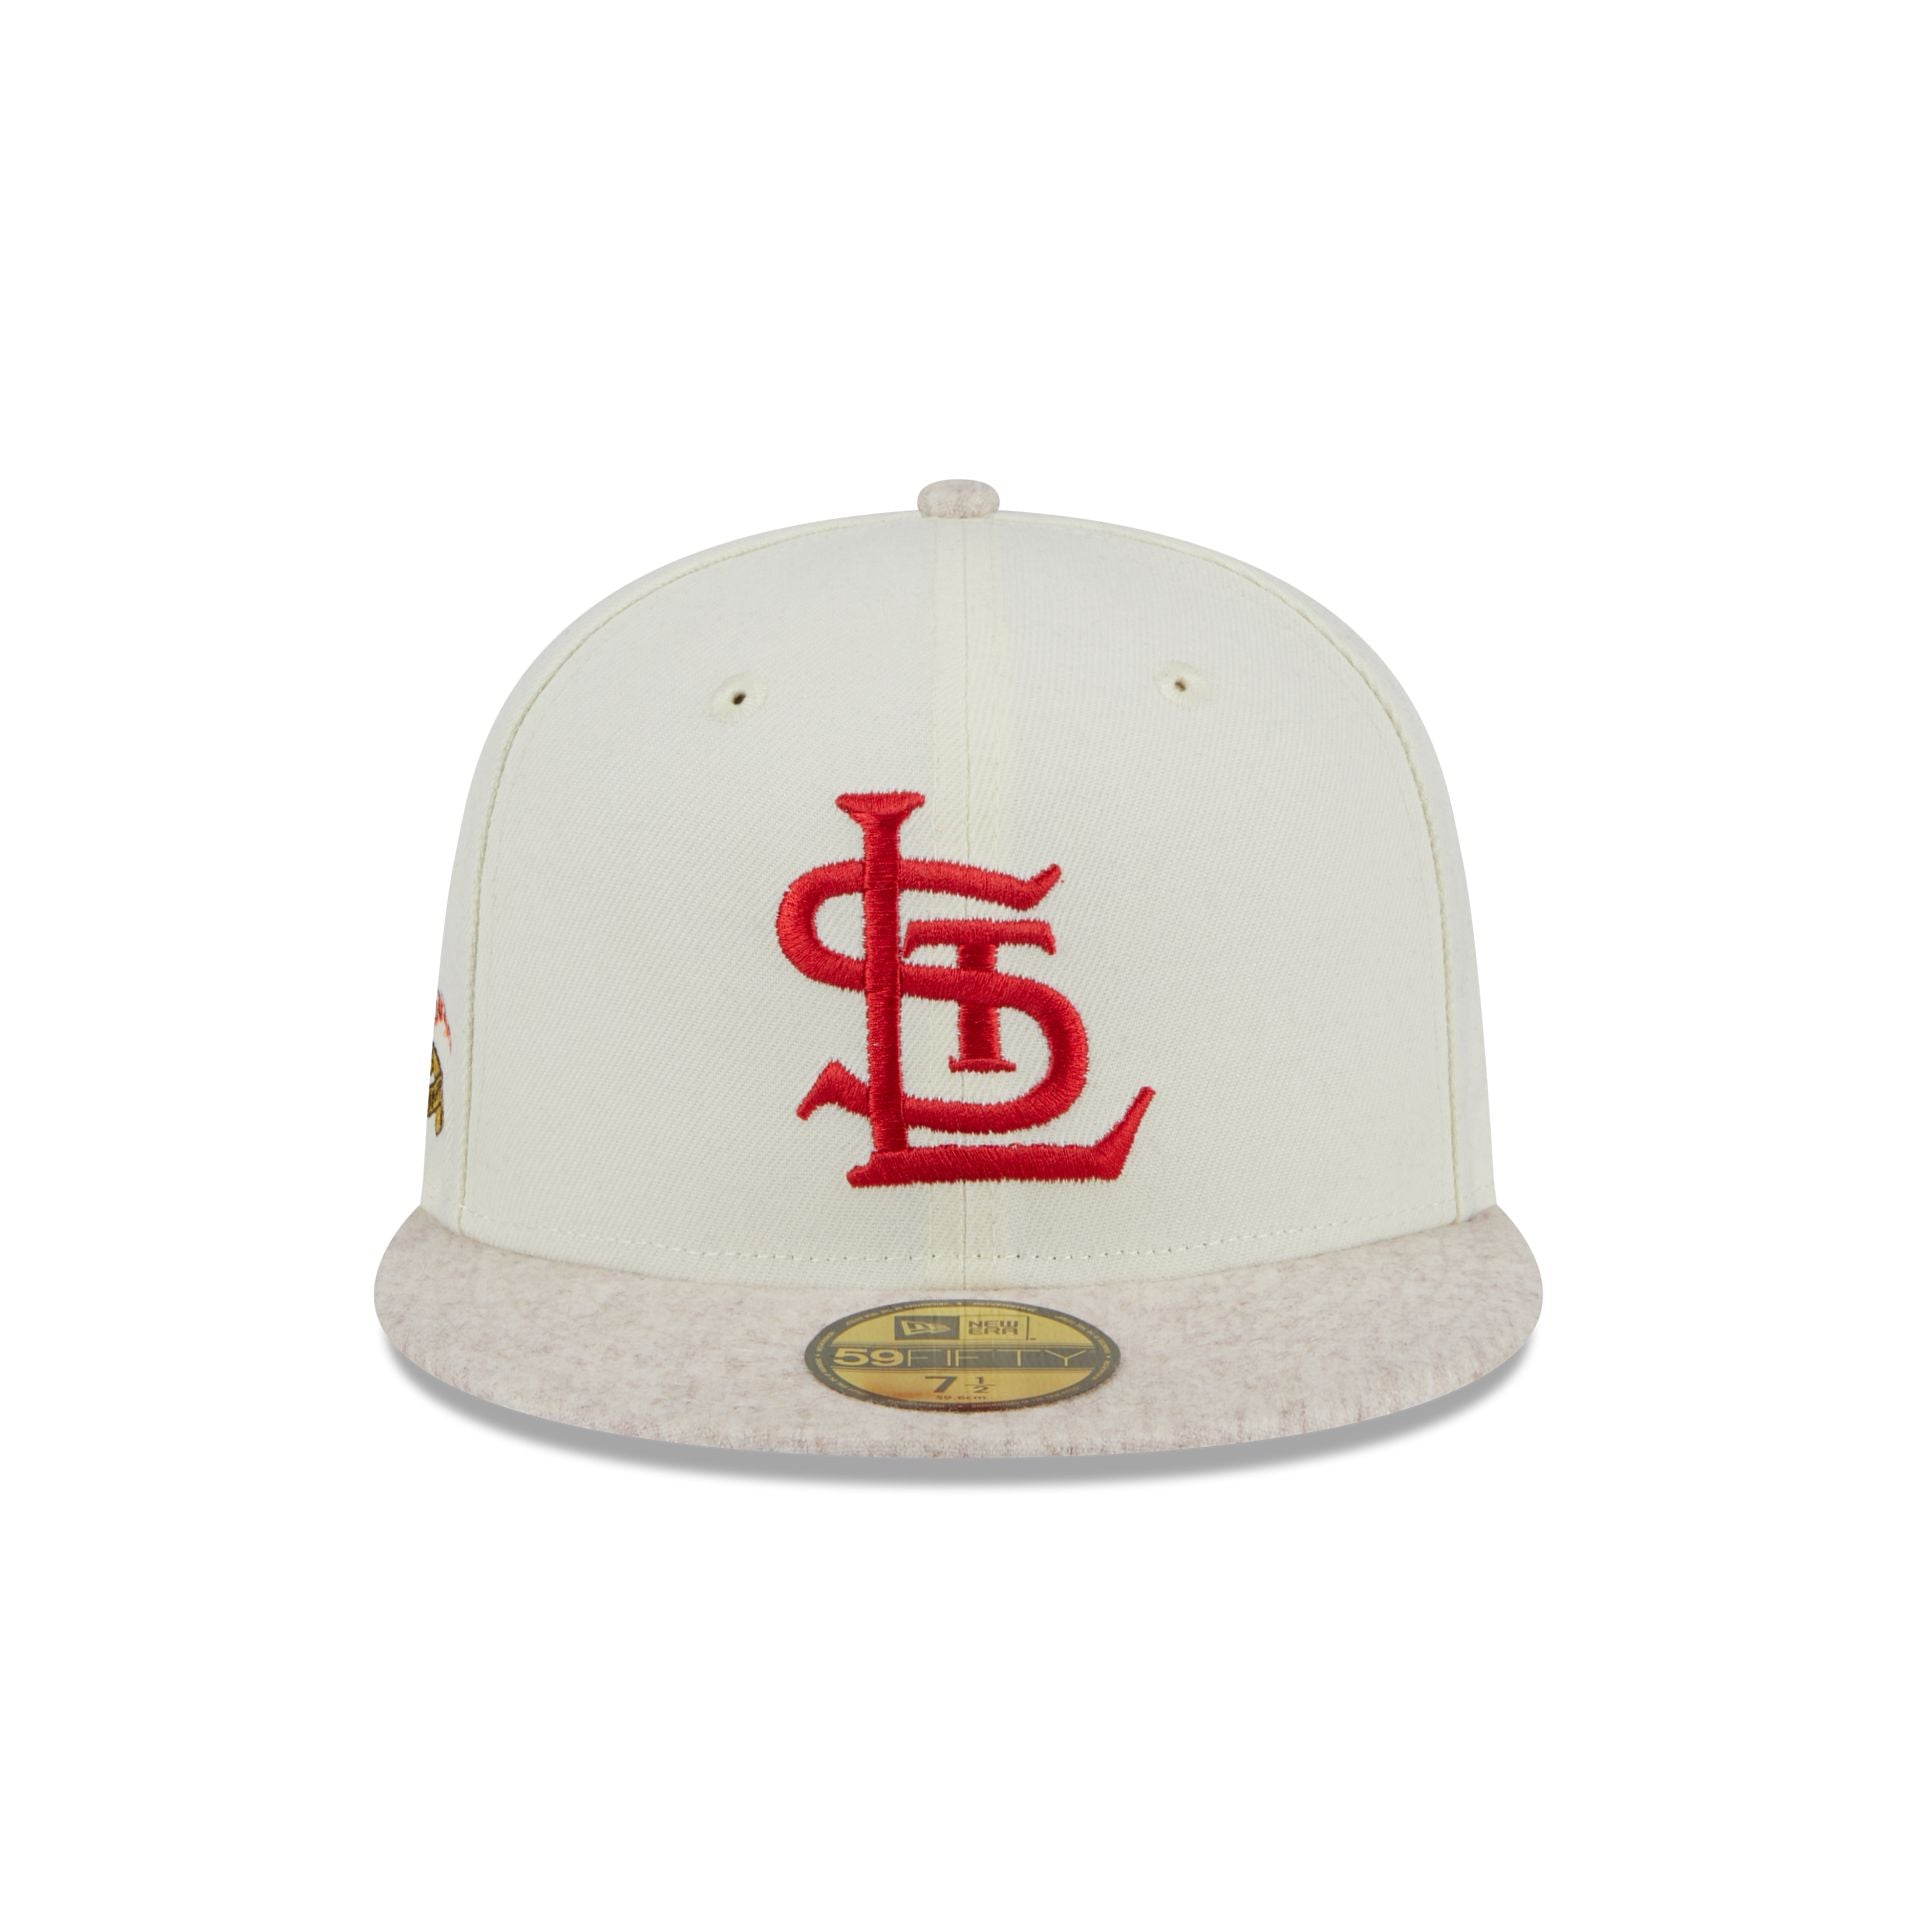 Louisville Bats - Throwback Redbirds fitted caps by New Era Cap now on sale  in the online Team Store.